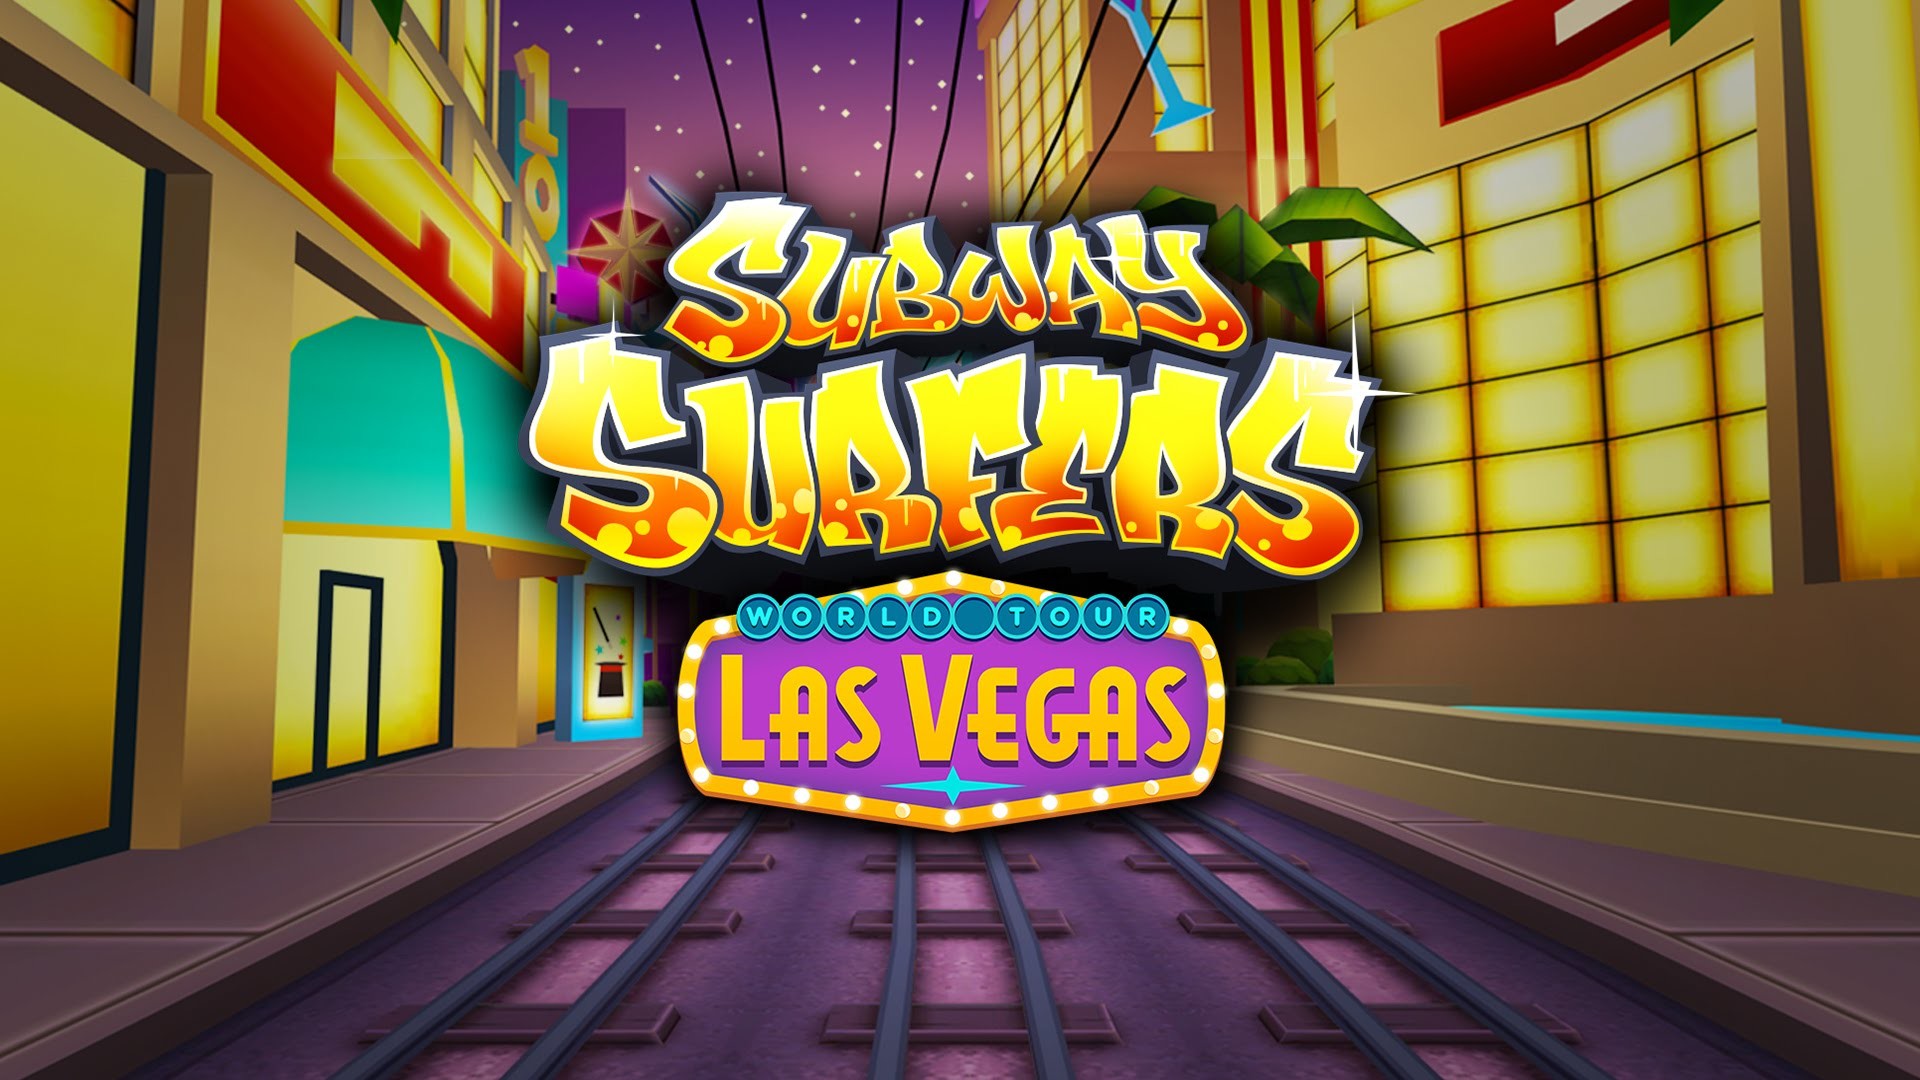 1920x1080 Subway Surfers Wallpapers HD